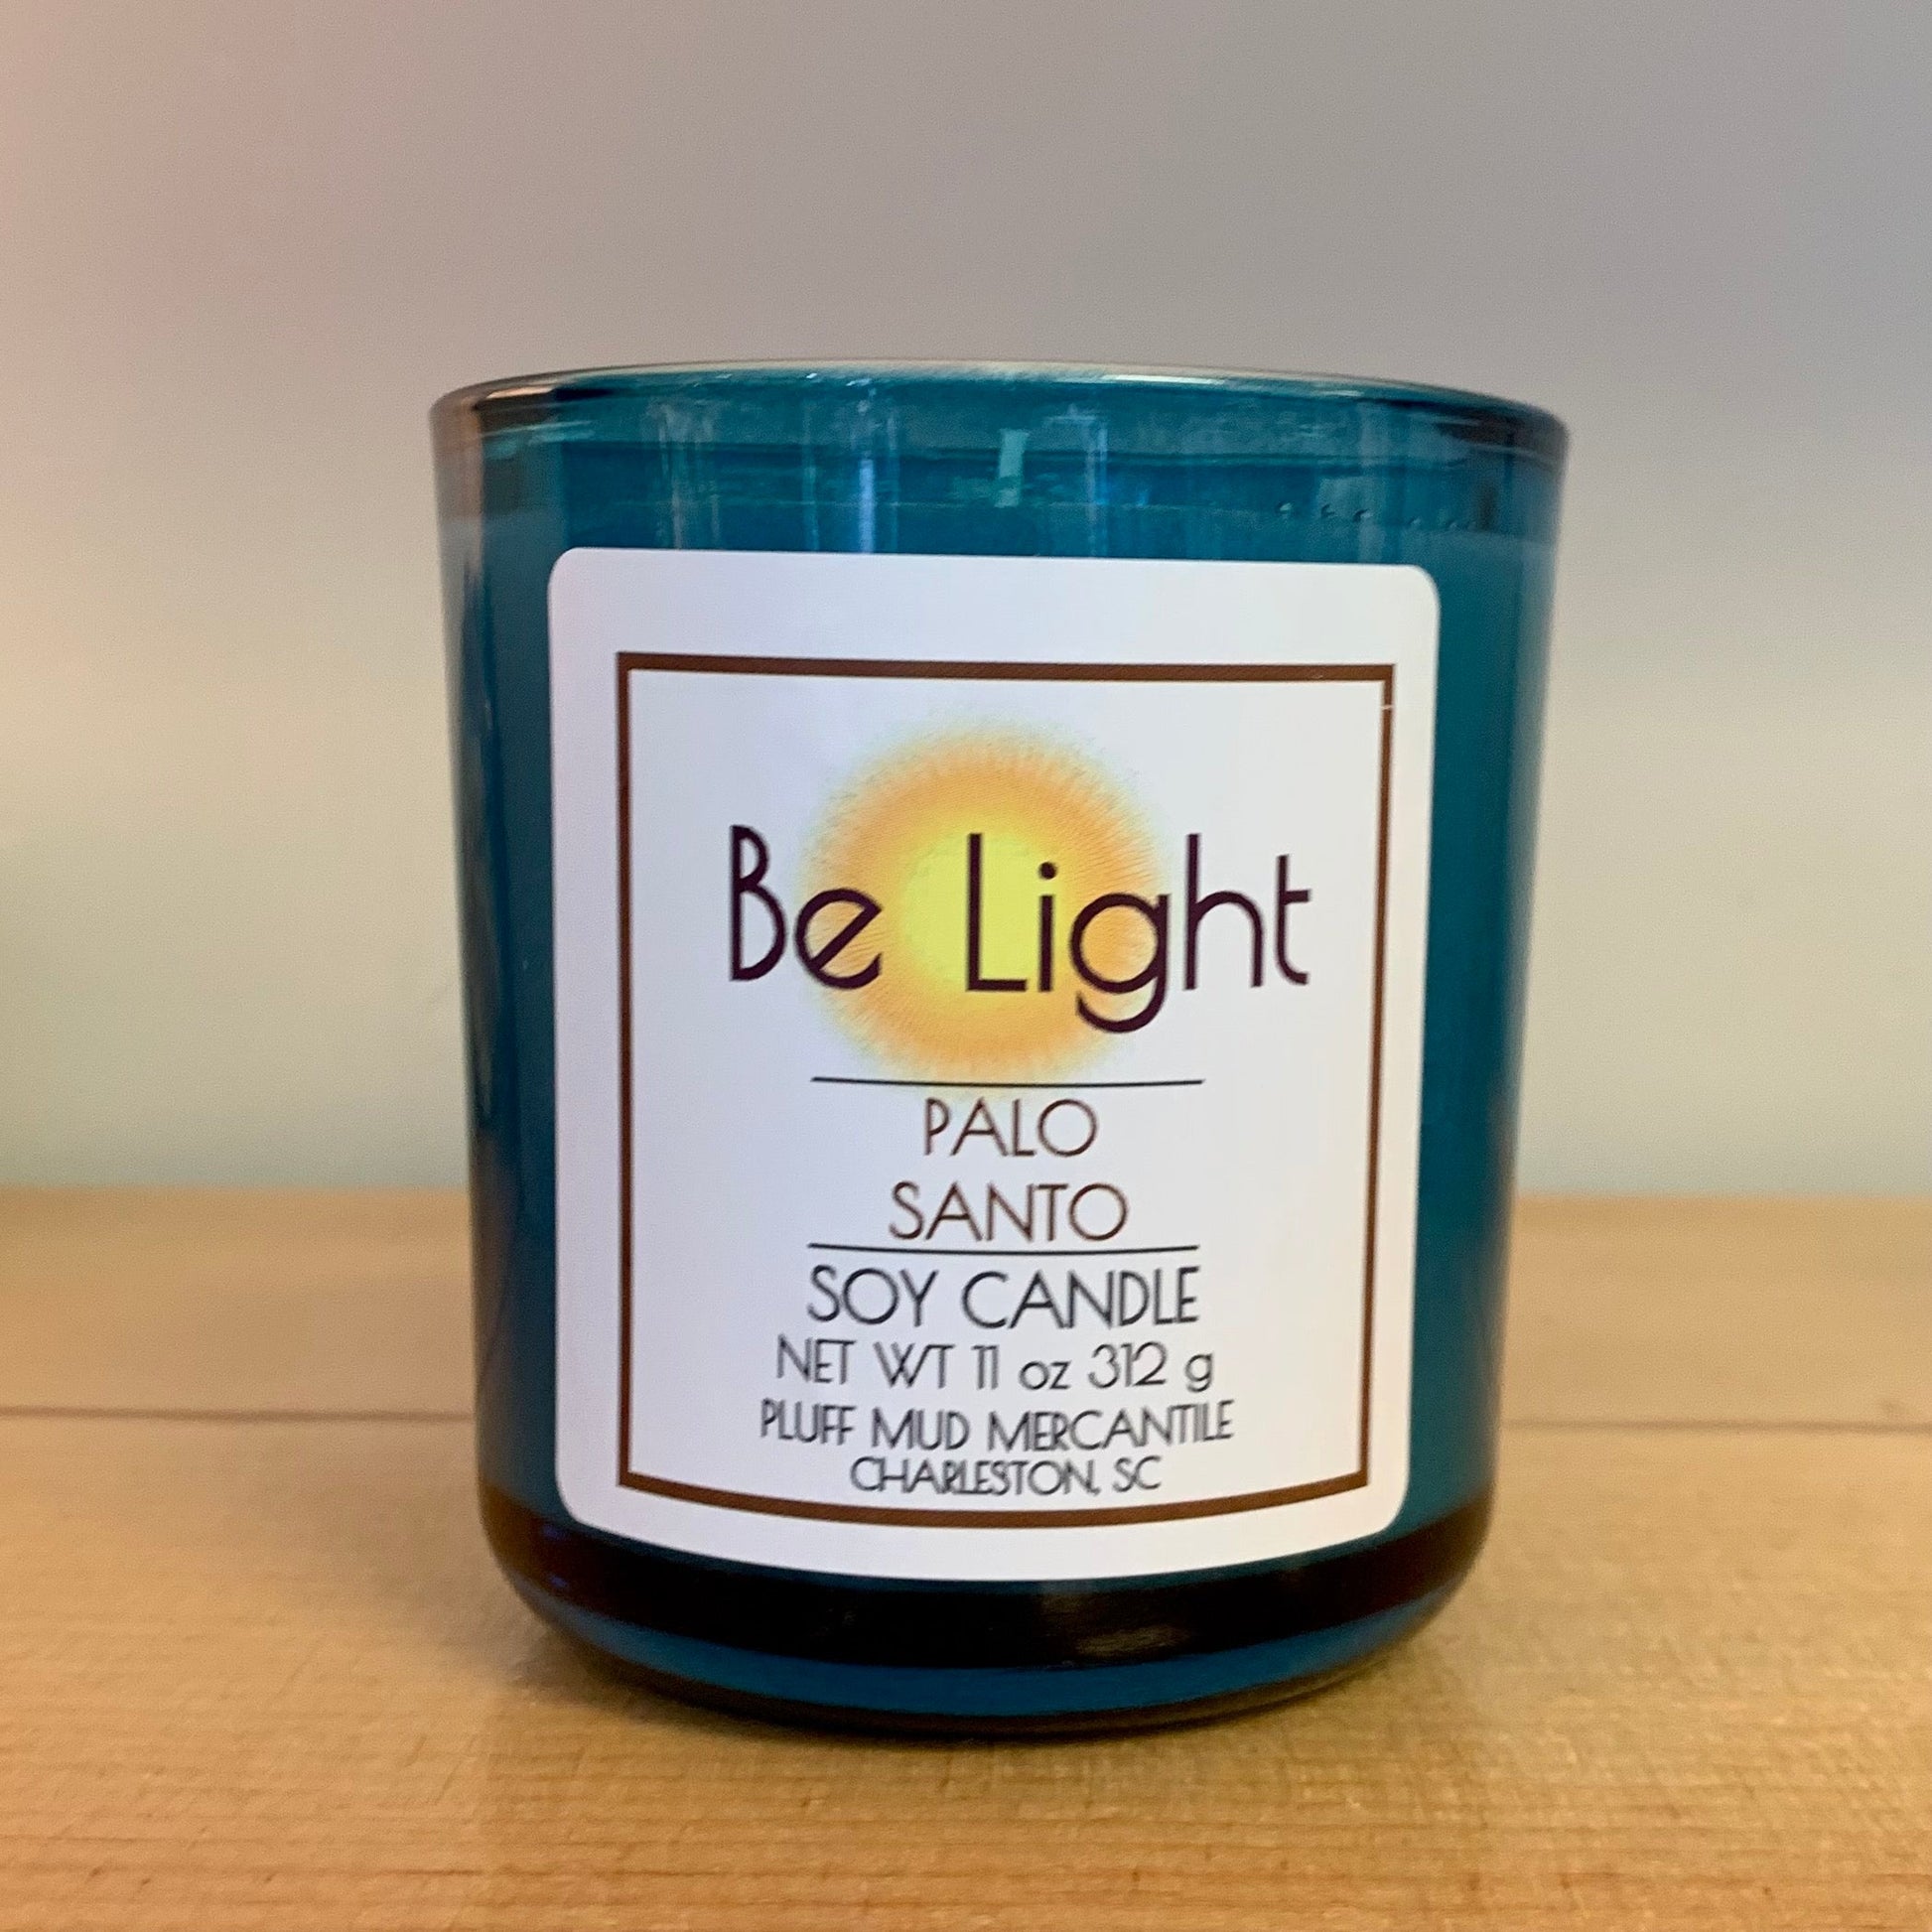 Be Light Palo Santo Candle - Pluff Mud Mercantile